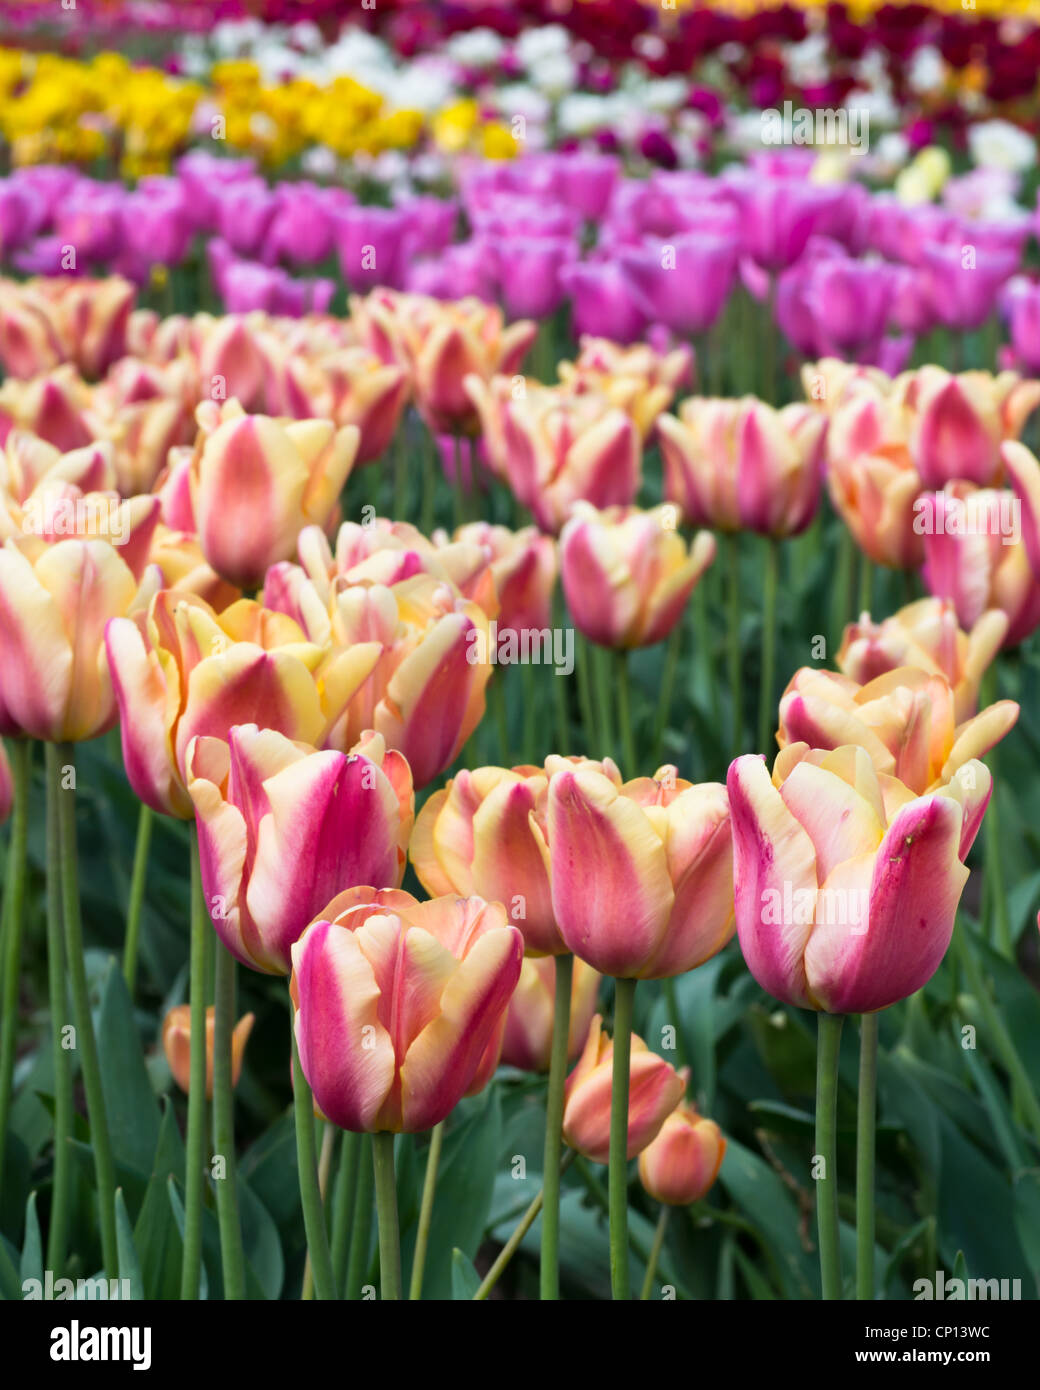 A group of blooming tulip bulbs of various colors Stock Photo